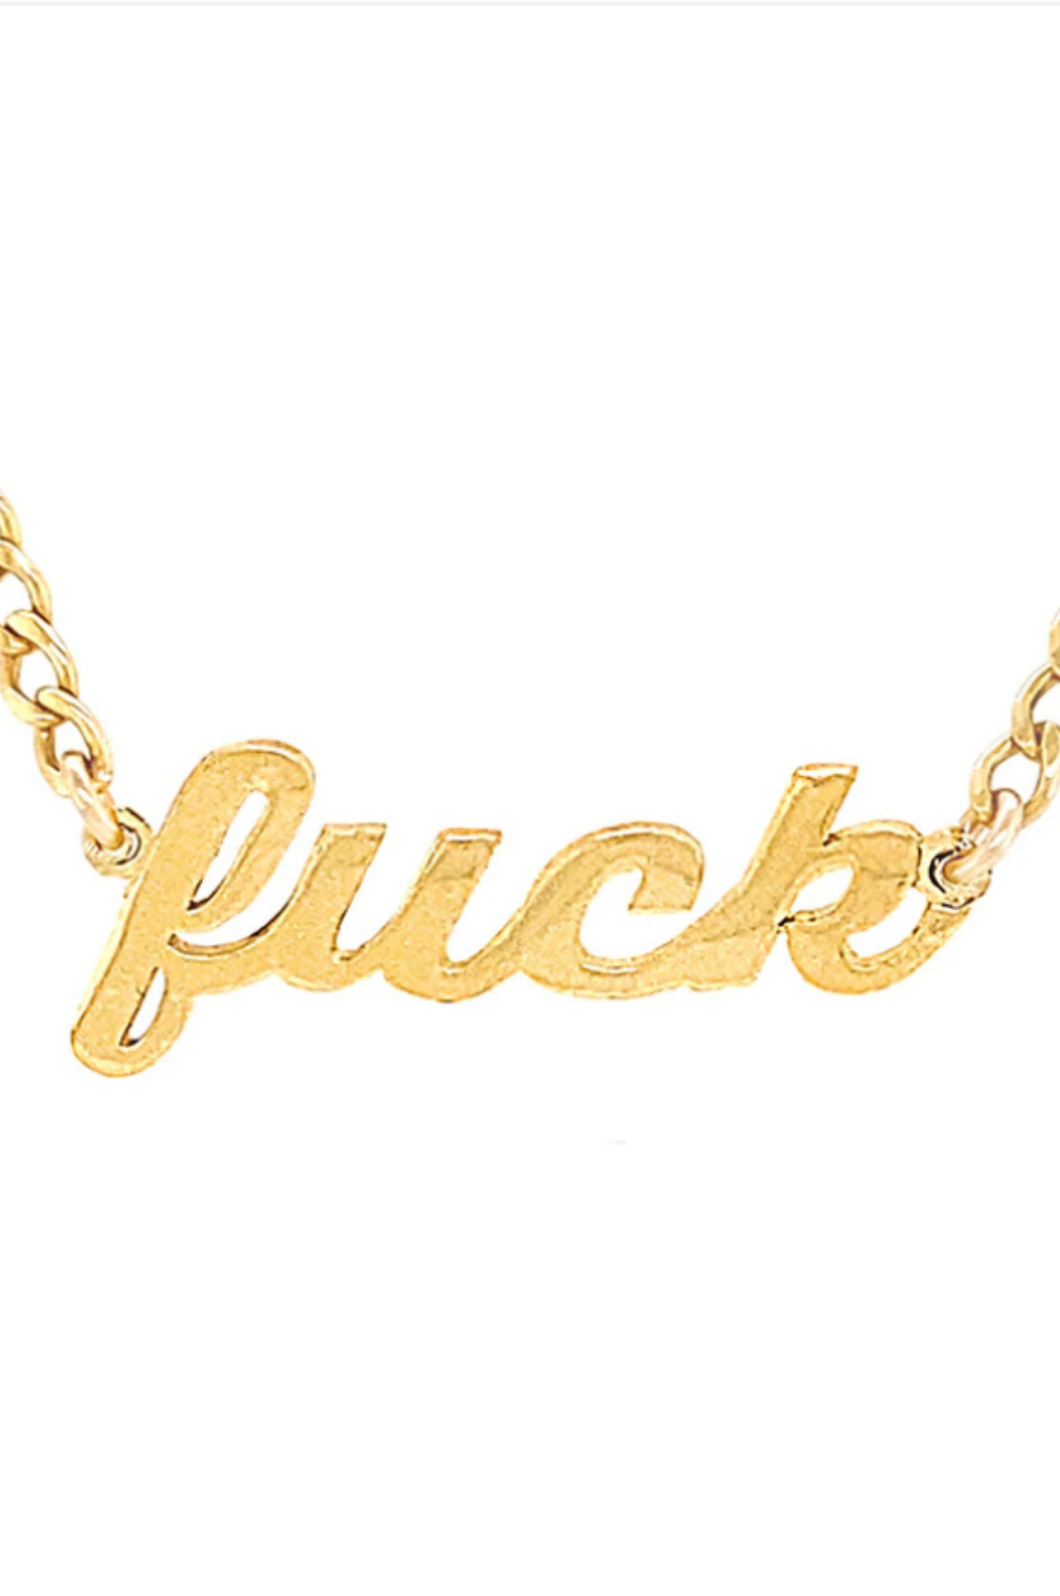 The Mrs. F*ck Necklace